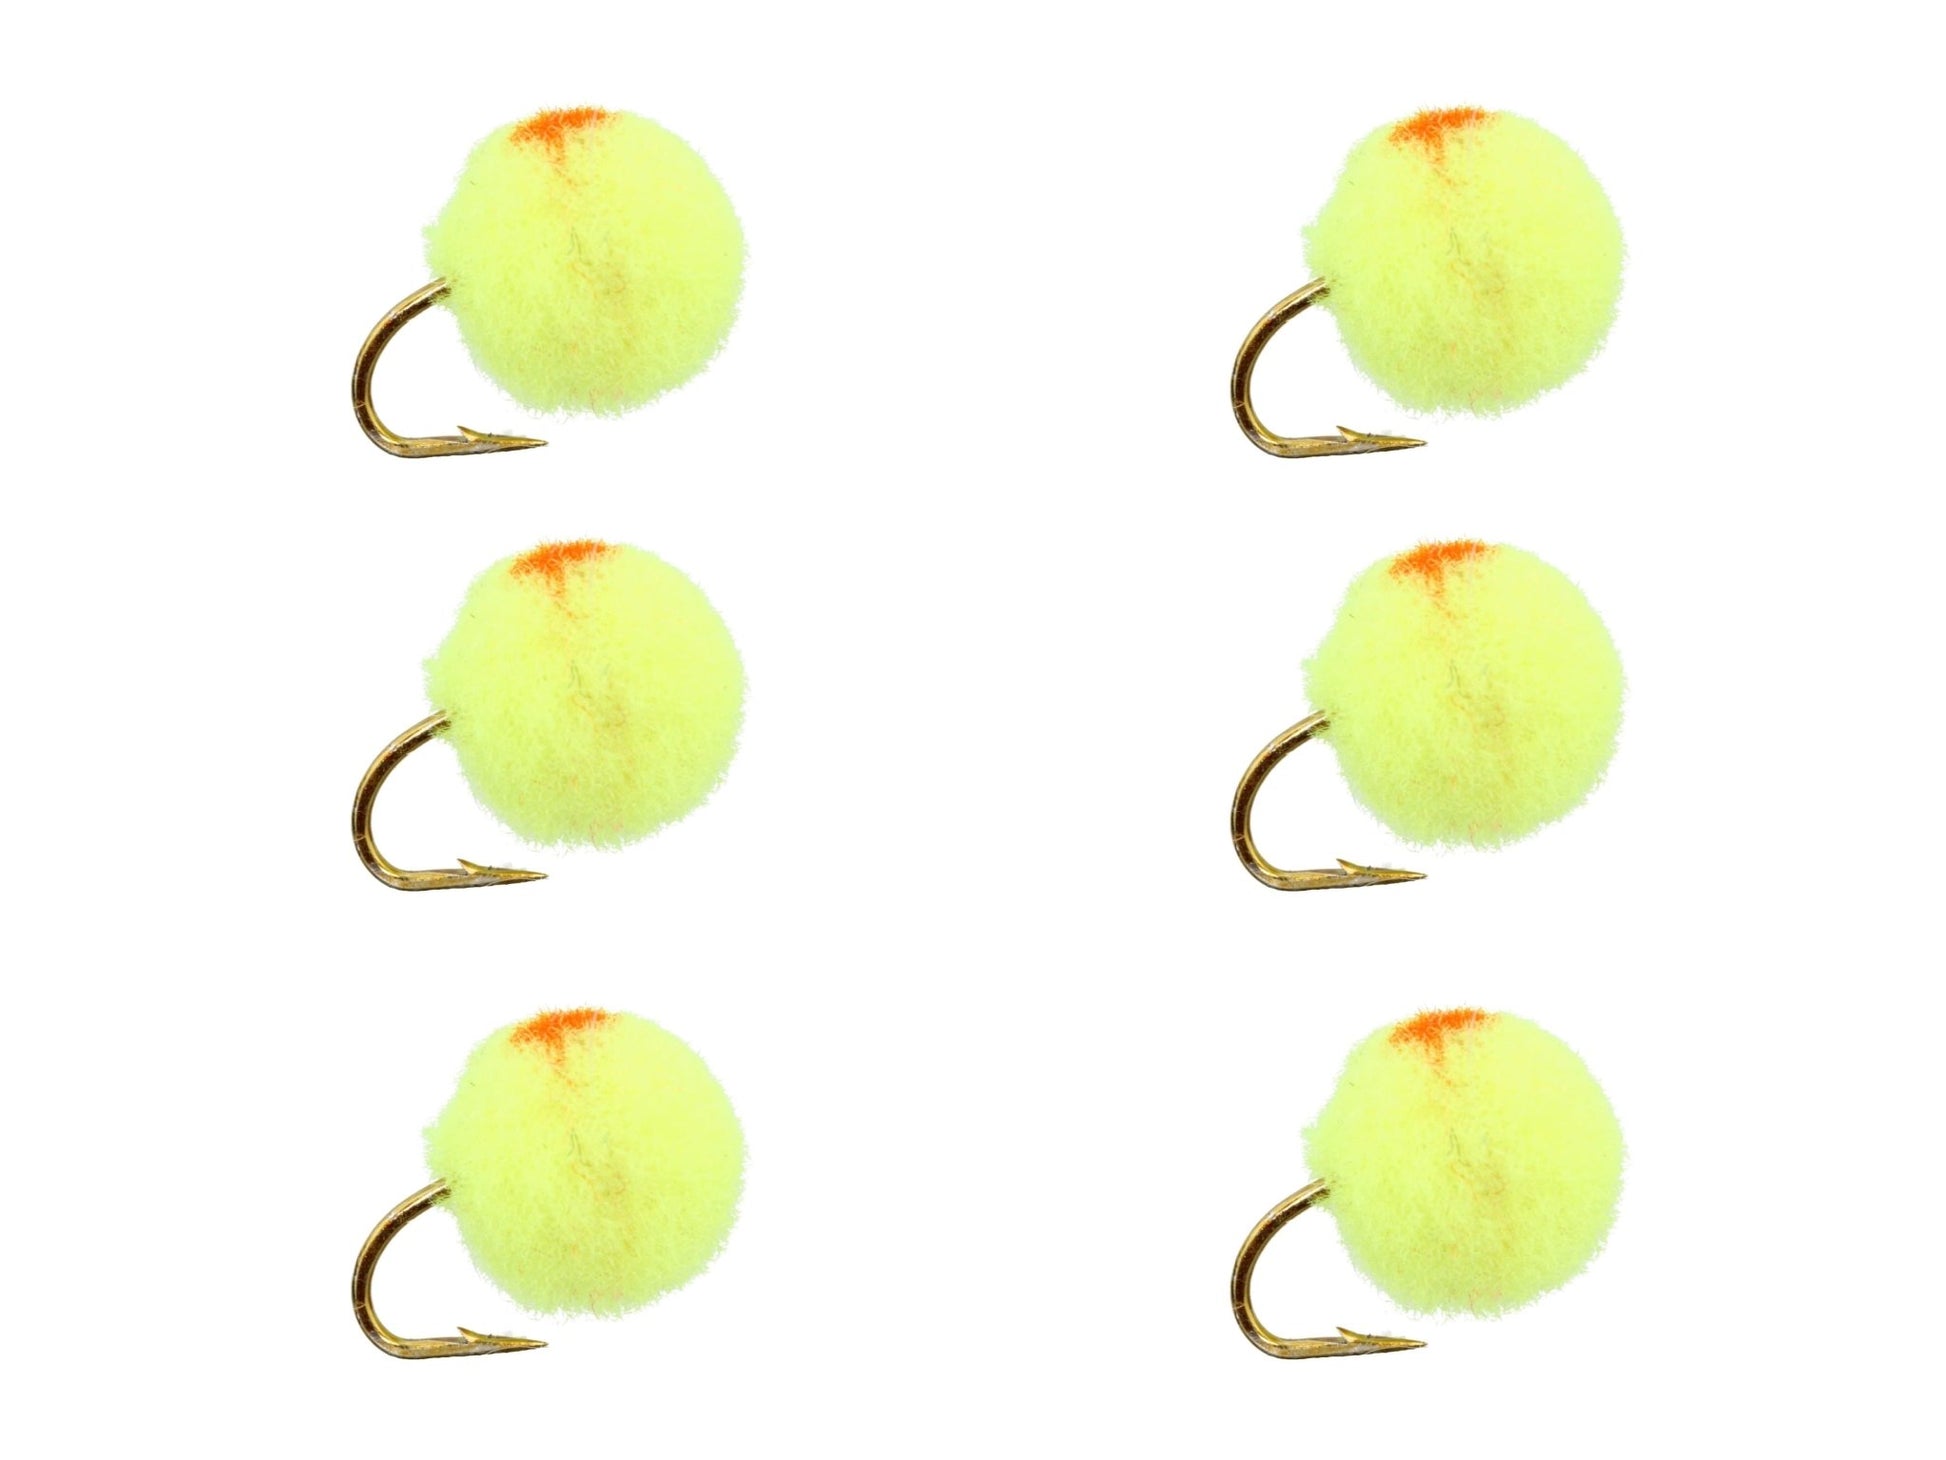 Wild Water Fly Fishing Yellow Egg with Orange Spot, Size 12, Qty. 6 - Angler's Pro Tackle & Outdoors